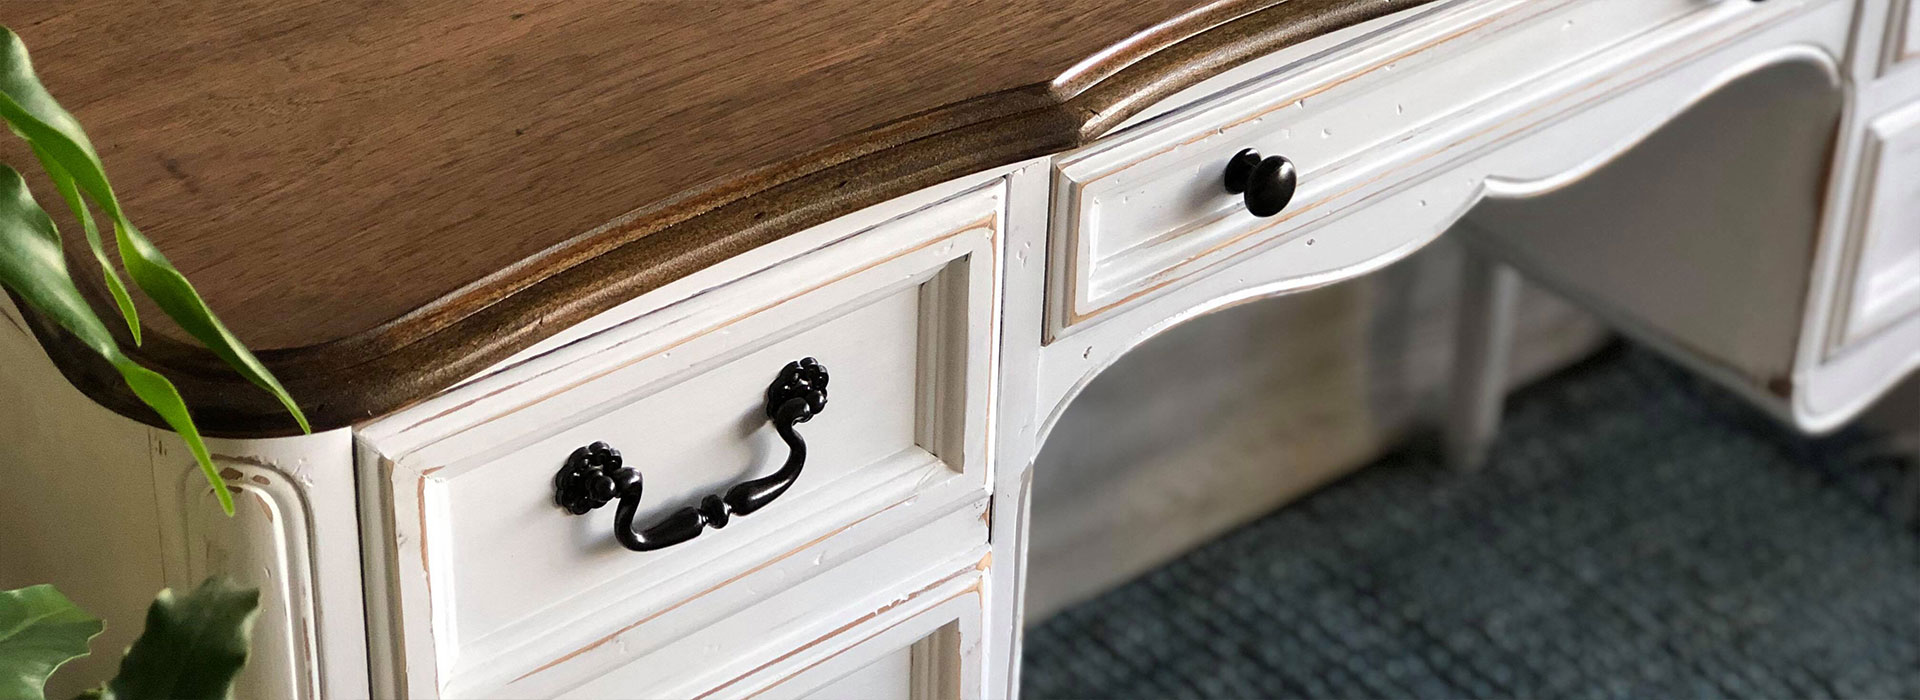 How to Care and Clean Painted Furniture